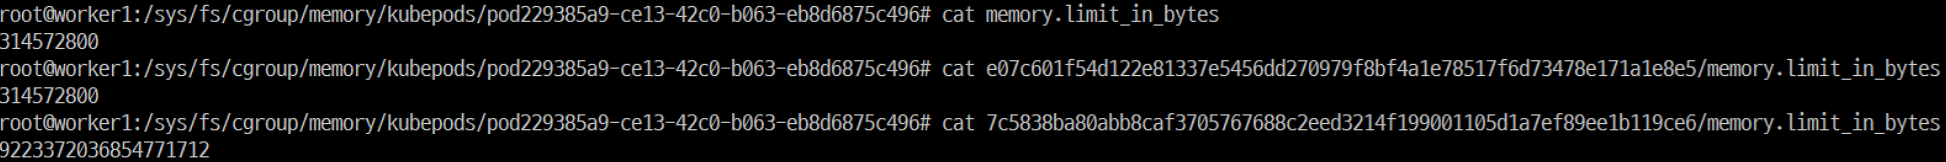 memory.limit_in_bytes